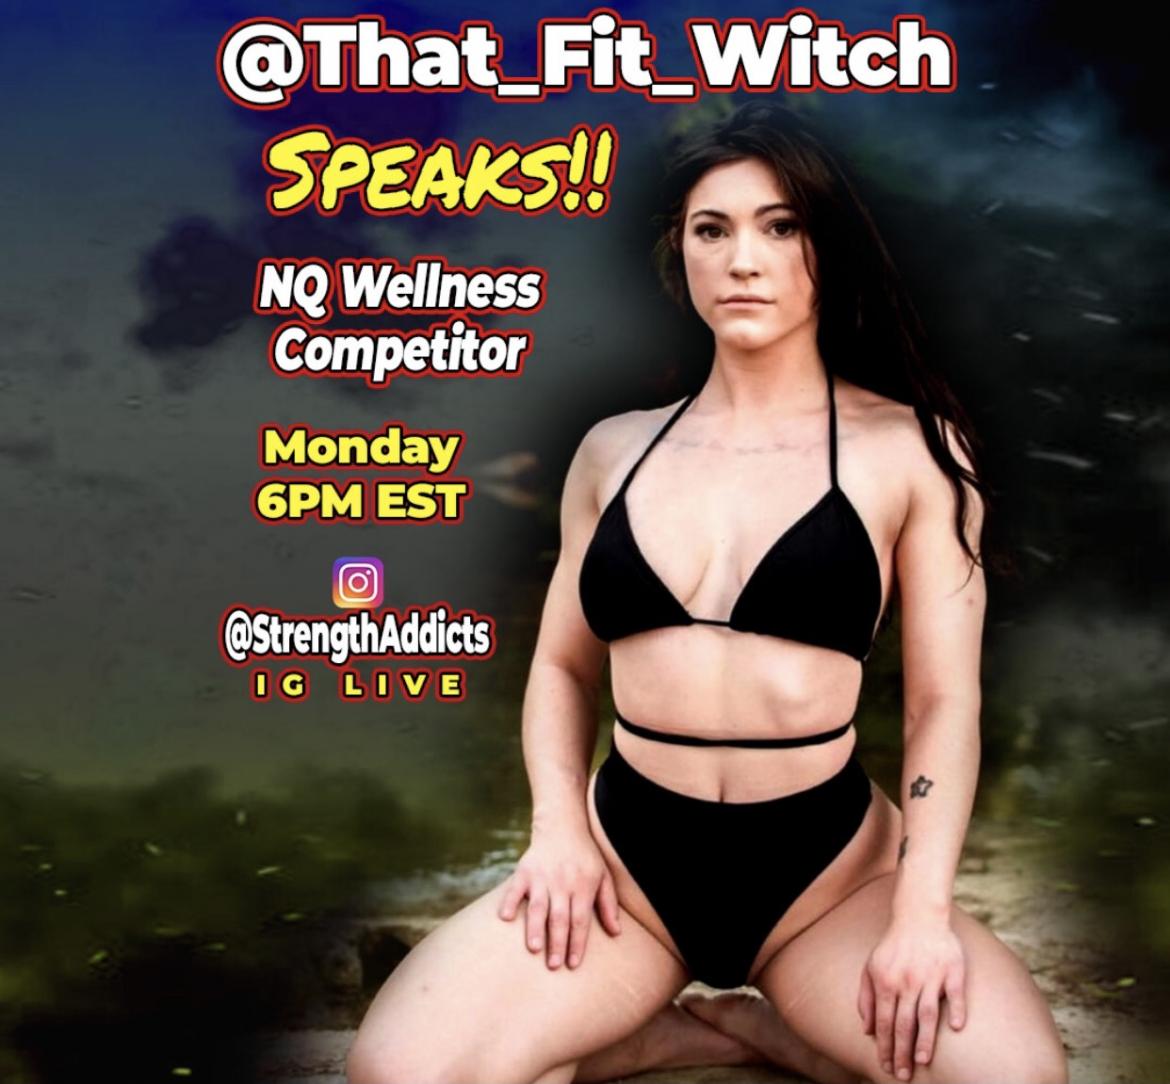 @That_Fit_Witch Talks Wellness!